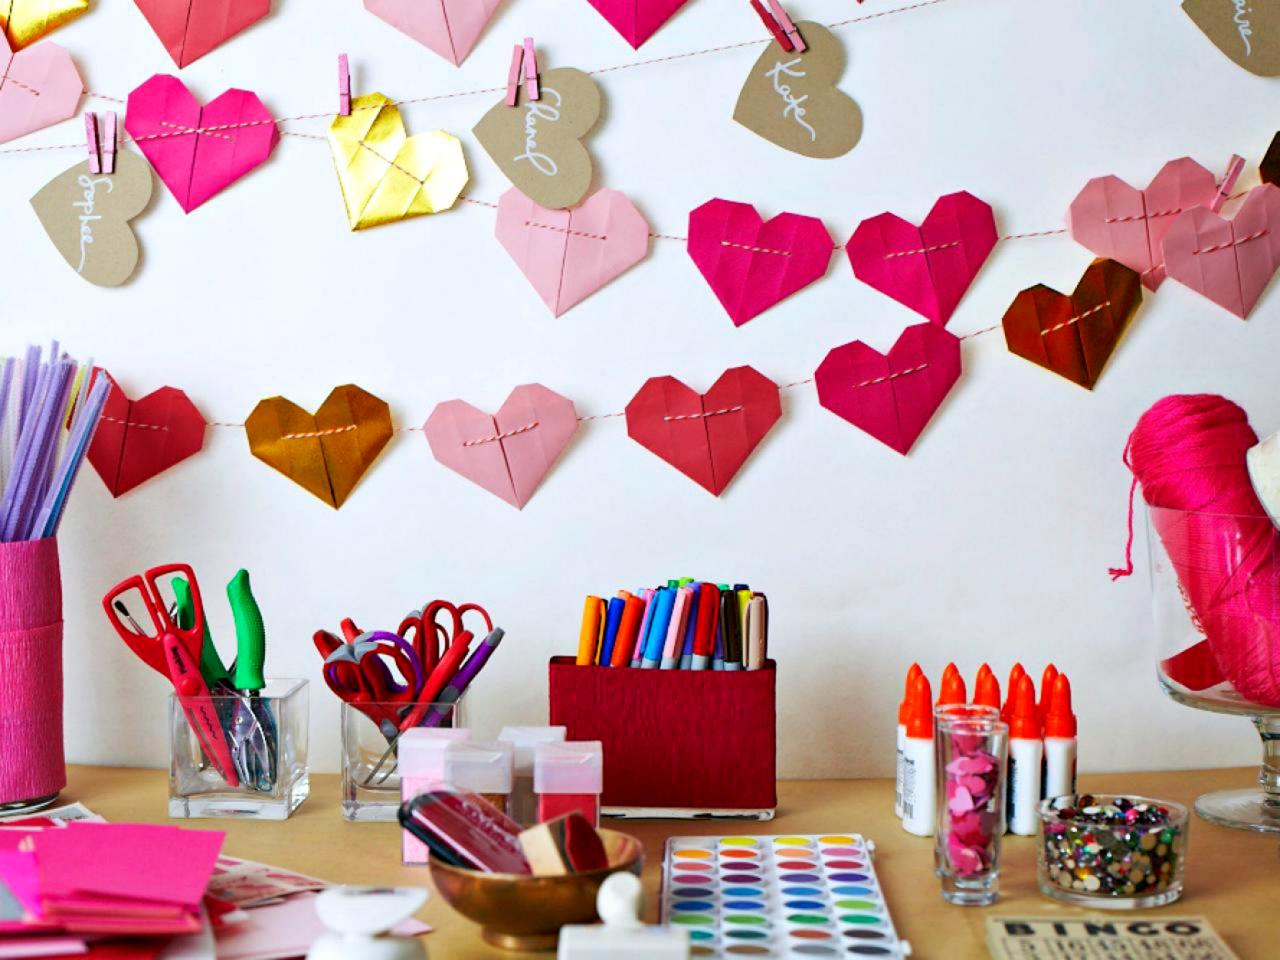 How to Throw a Galentine's Day Party | HGTV's Decorating & Design Blog | HGTV1280 x 960